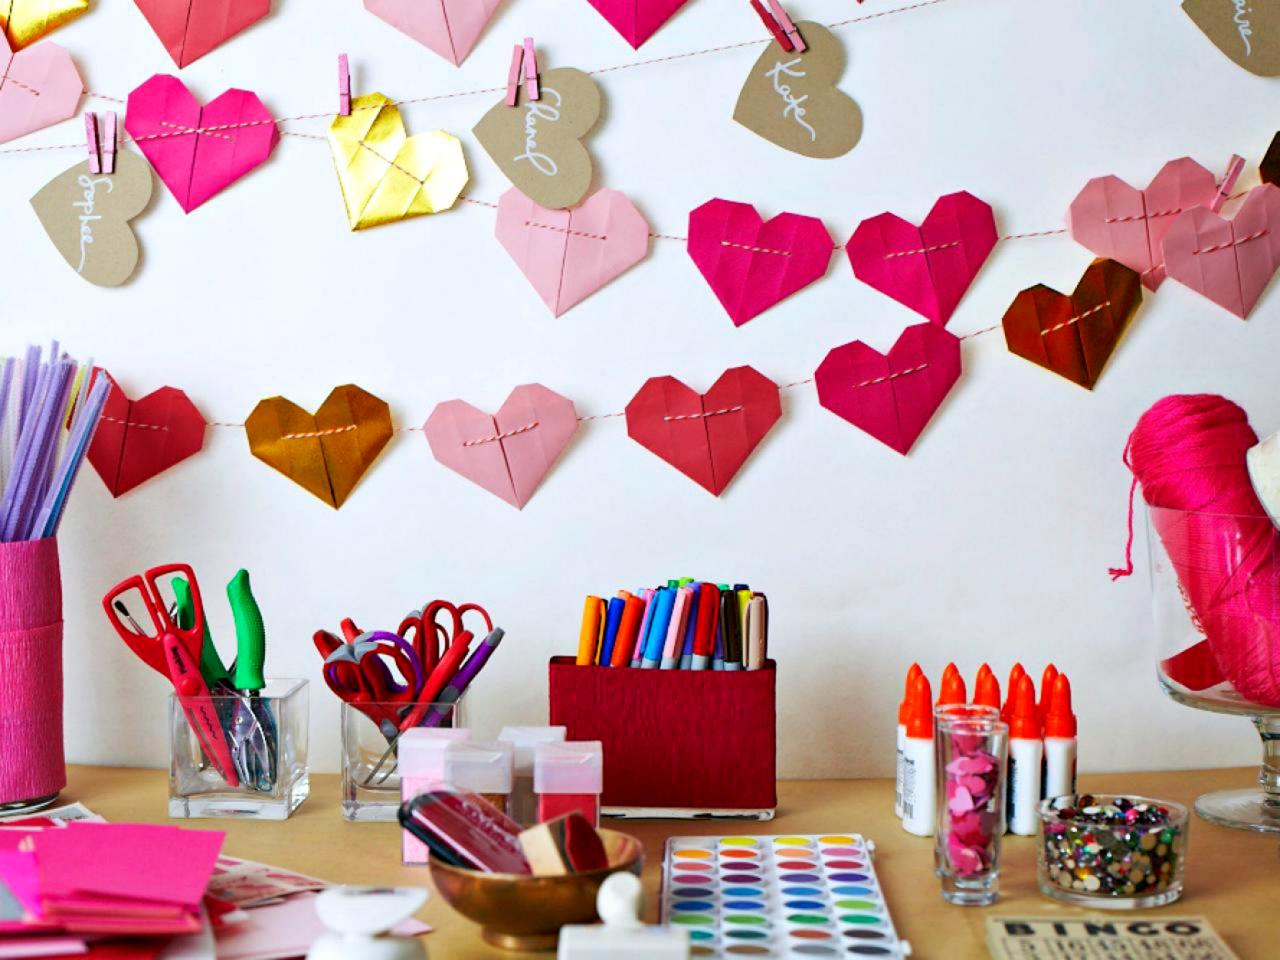 How to Throw a Galentine's Day Party | HGTV's Decorating & Design Blog | HGTV1280 x 960